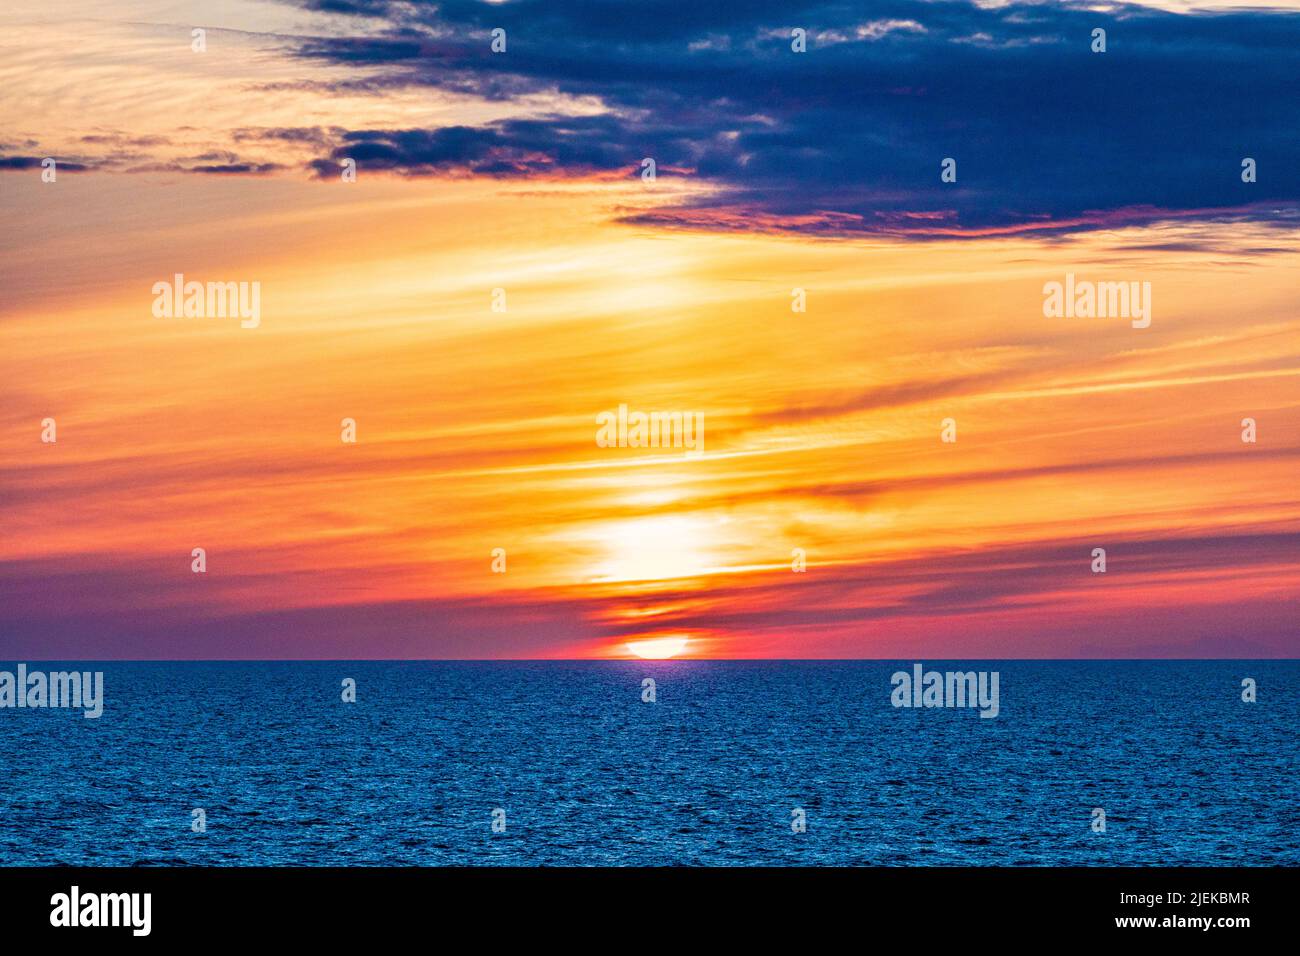 A summer sunset in the Baltic Sea off the coast of Sweden Stock Photo